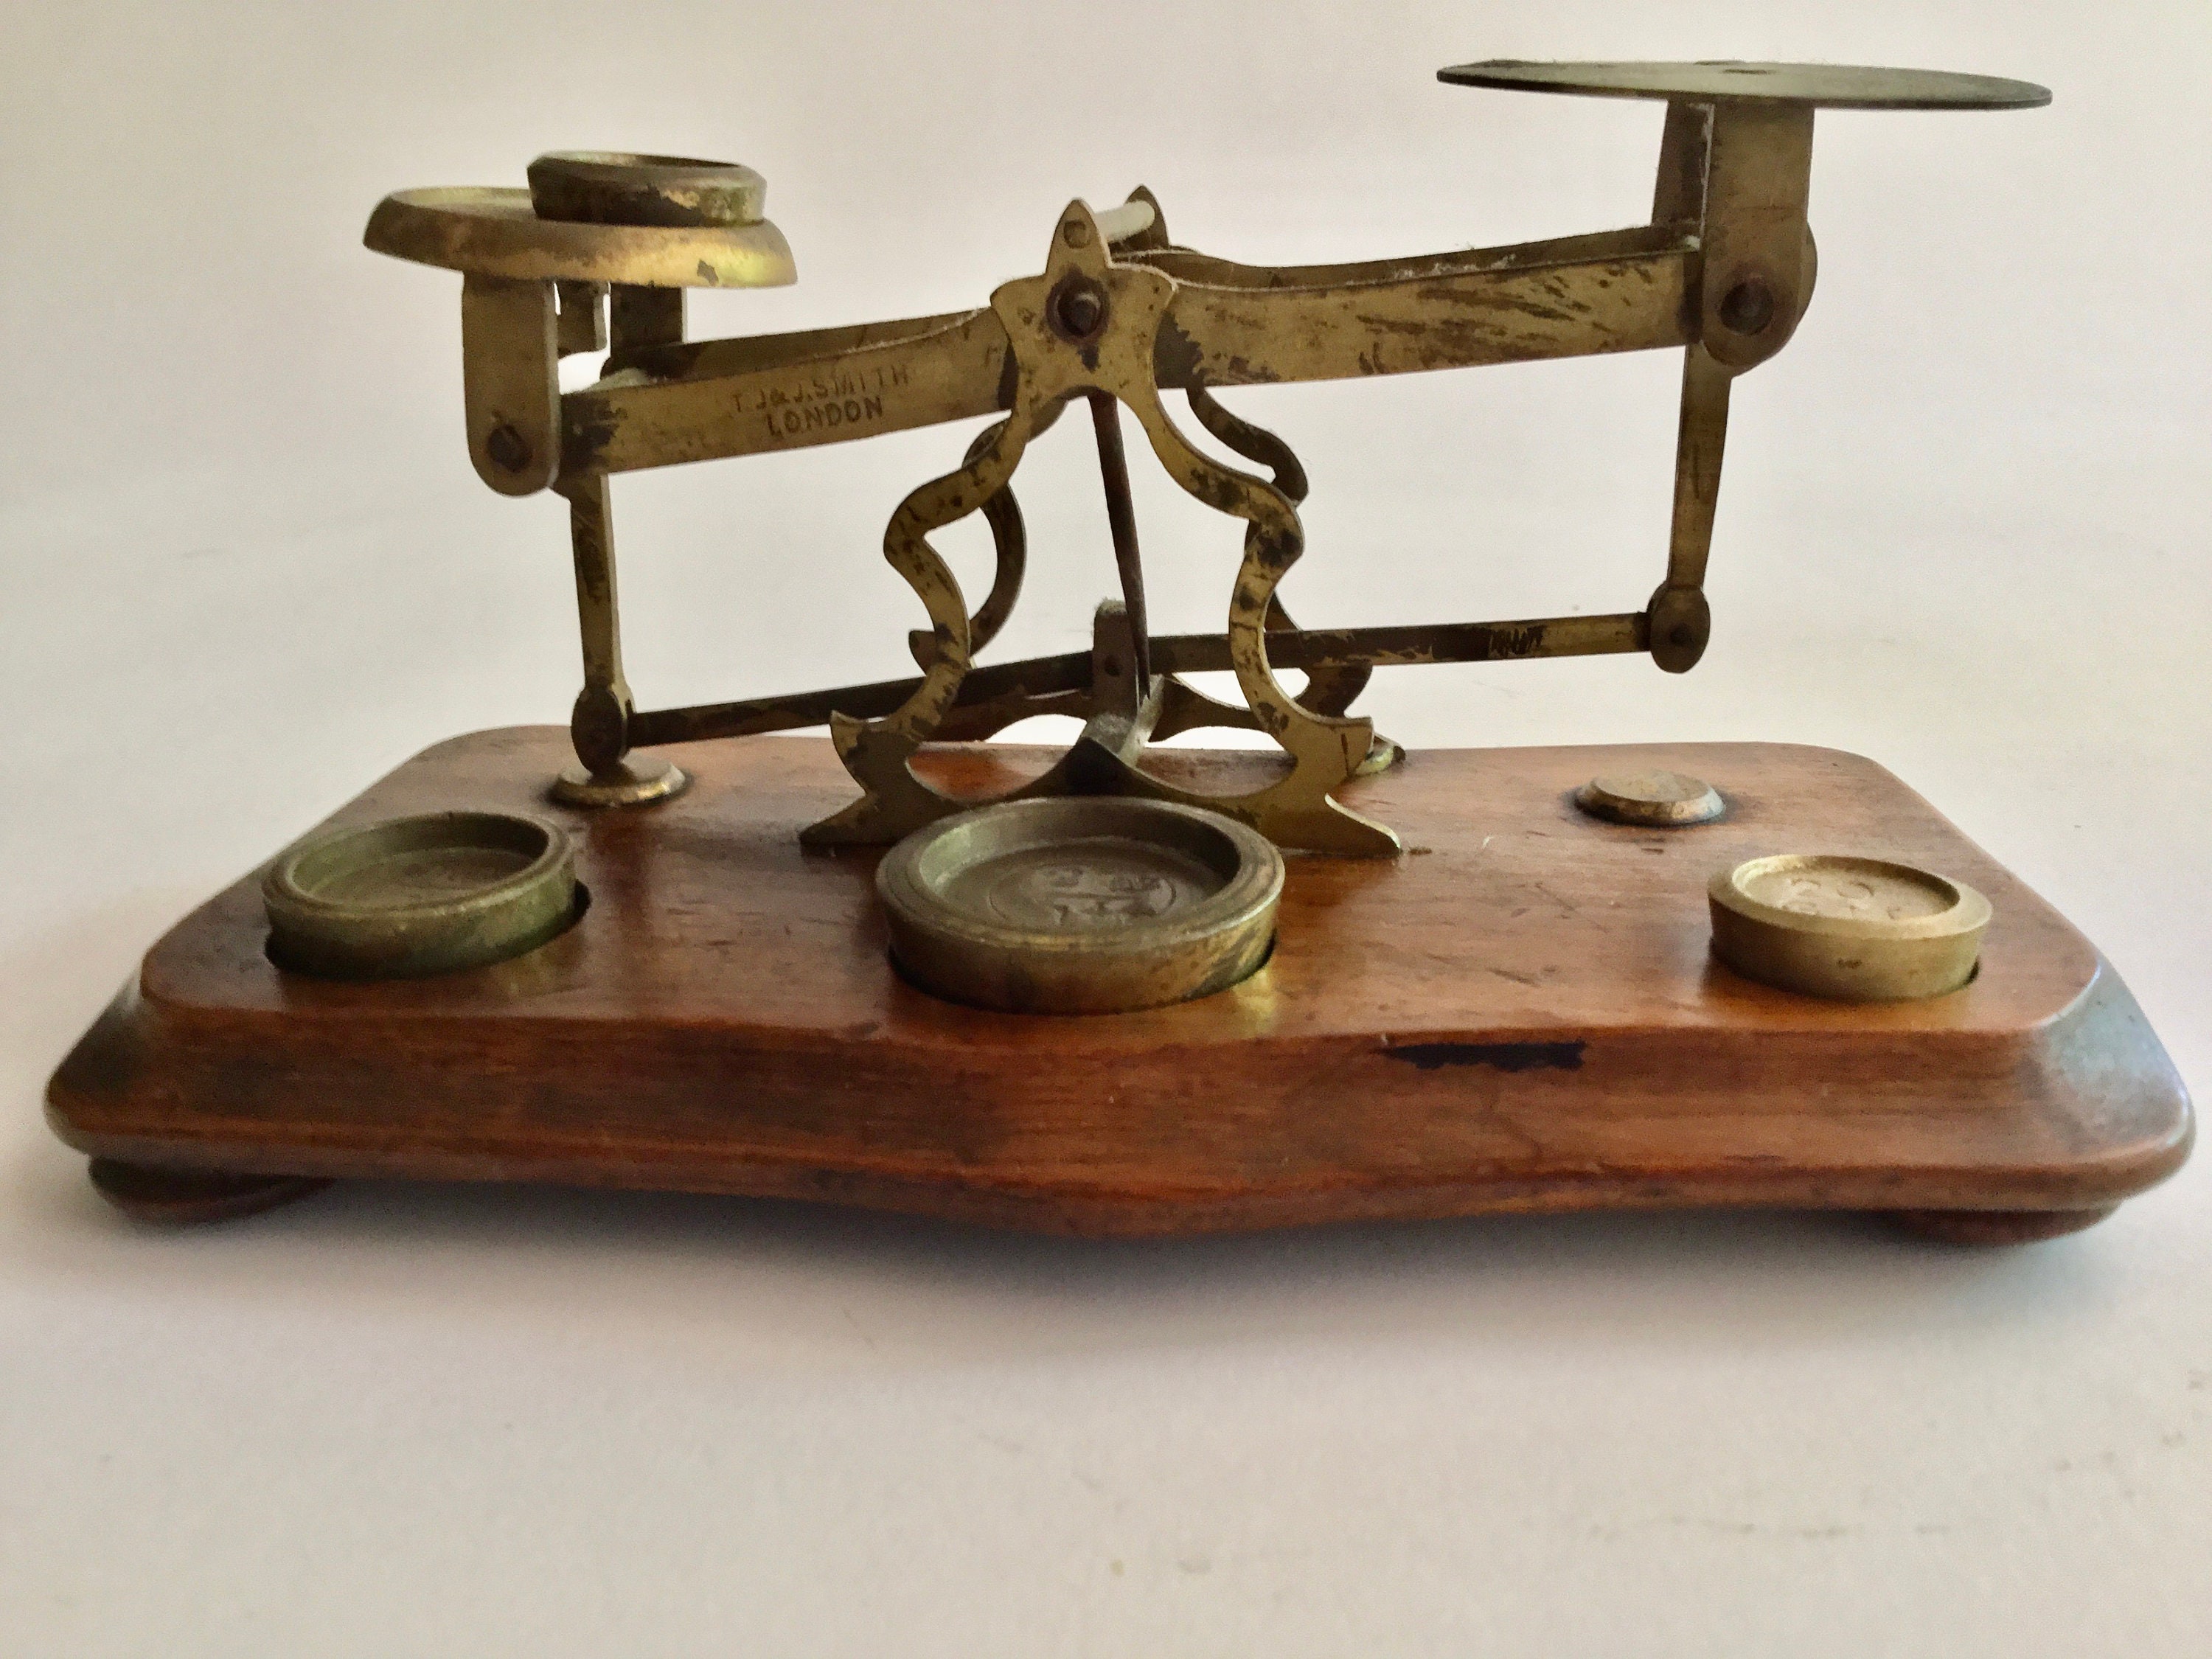 Handsome Antique English Brass Postal Scale By Townsend & Co. - 1888, 325713